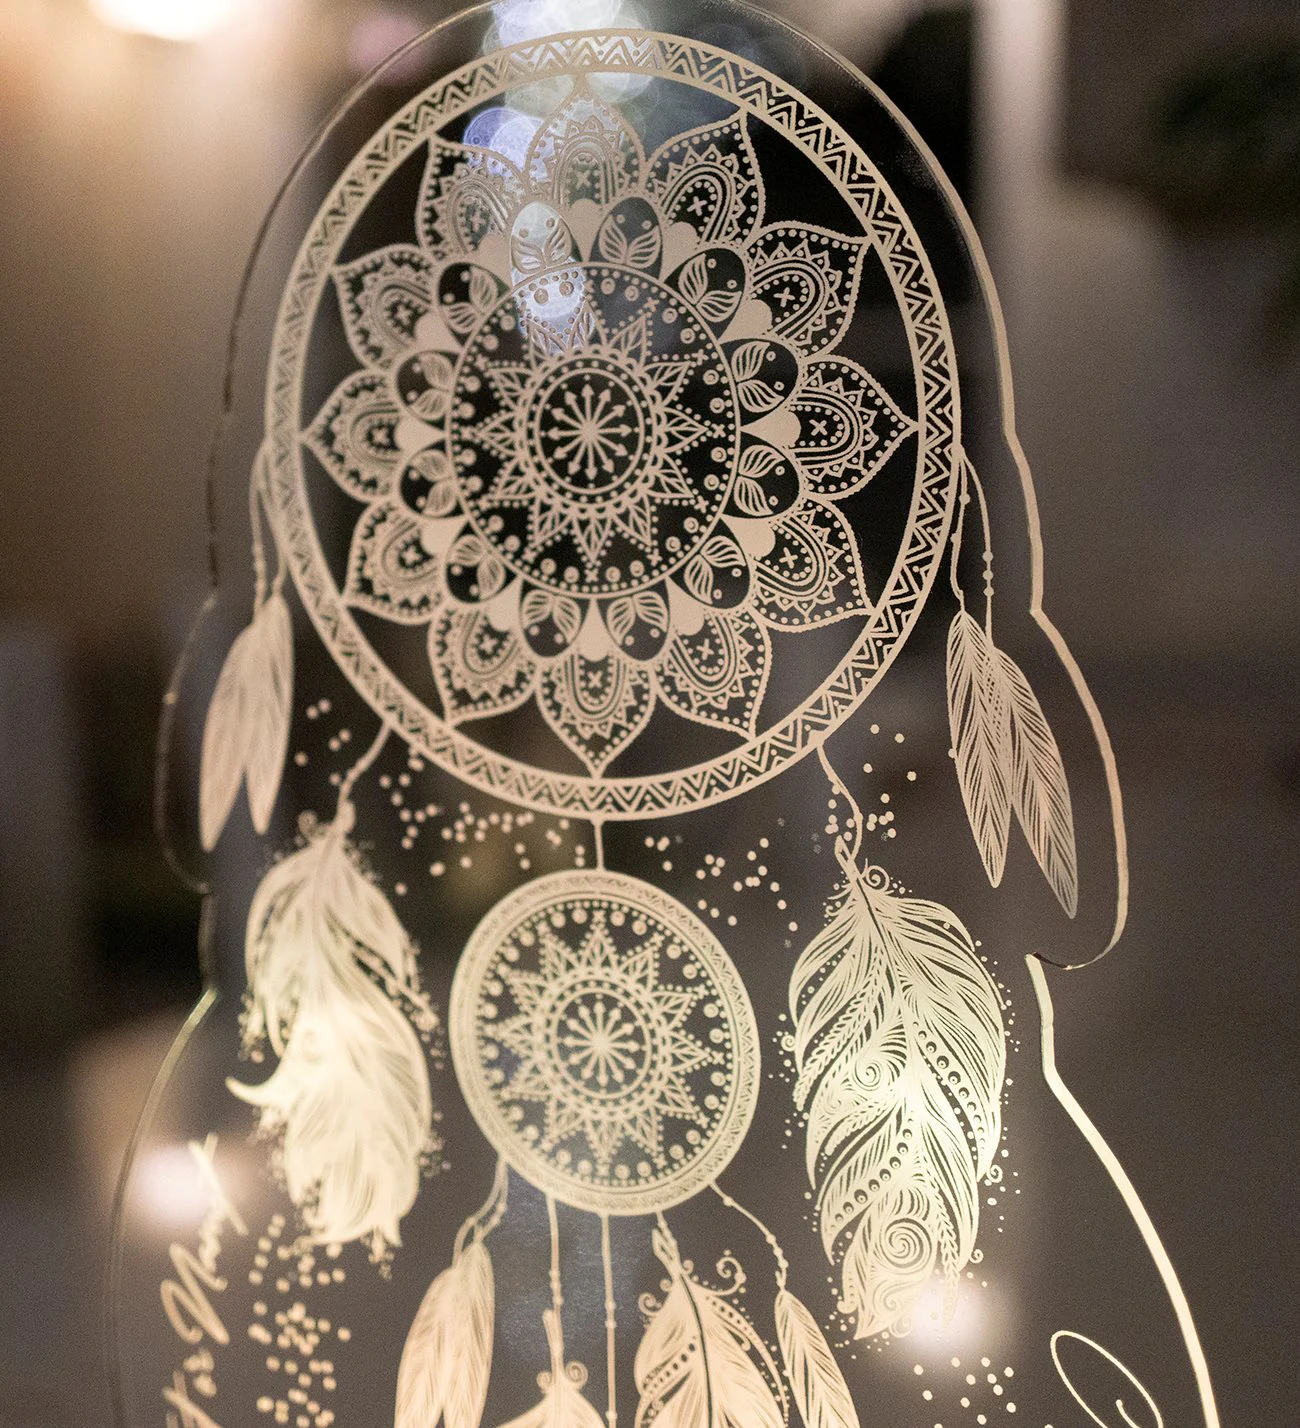 DREAMCATCHER PERSONALIZED 3D LAMP WITH YOUR TEXT DREAMCATCHER 